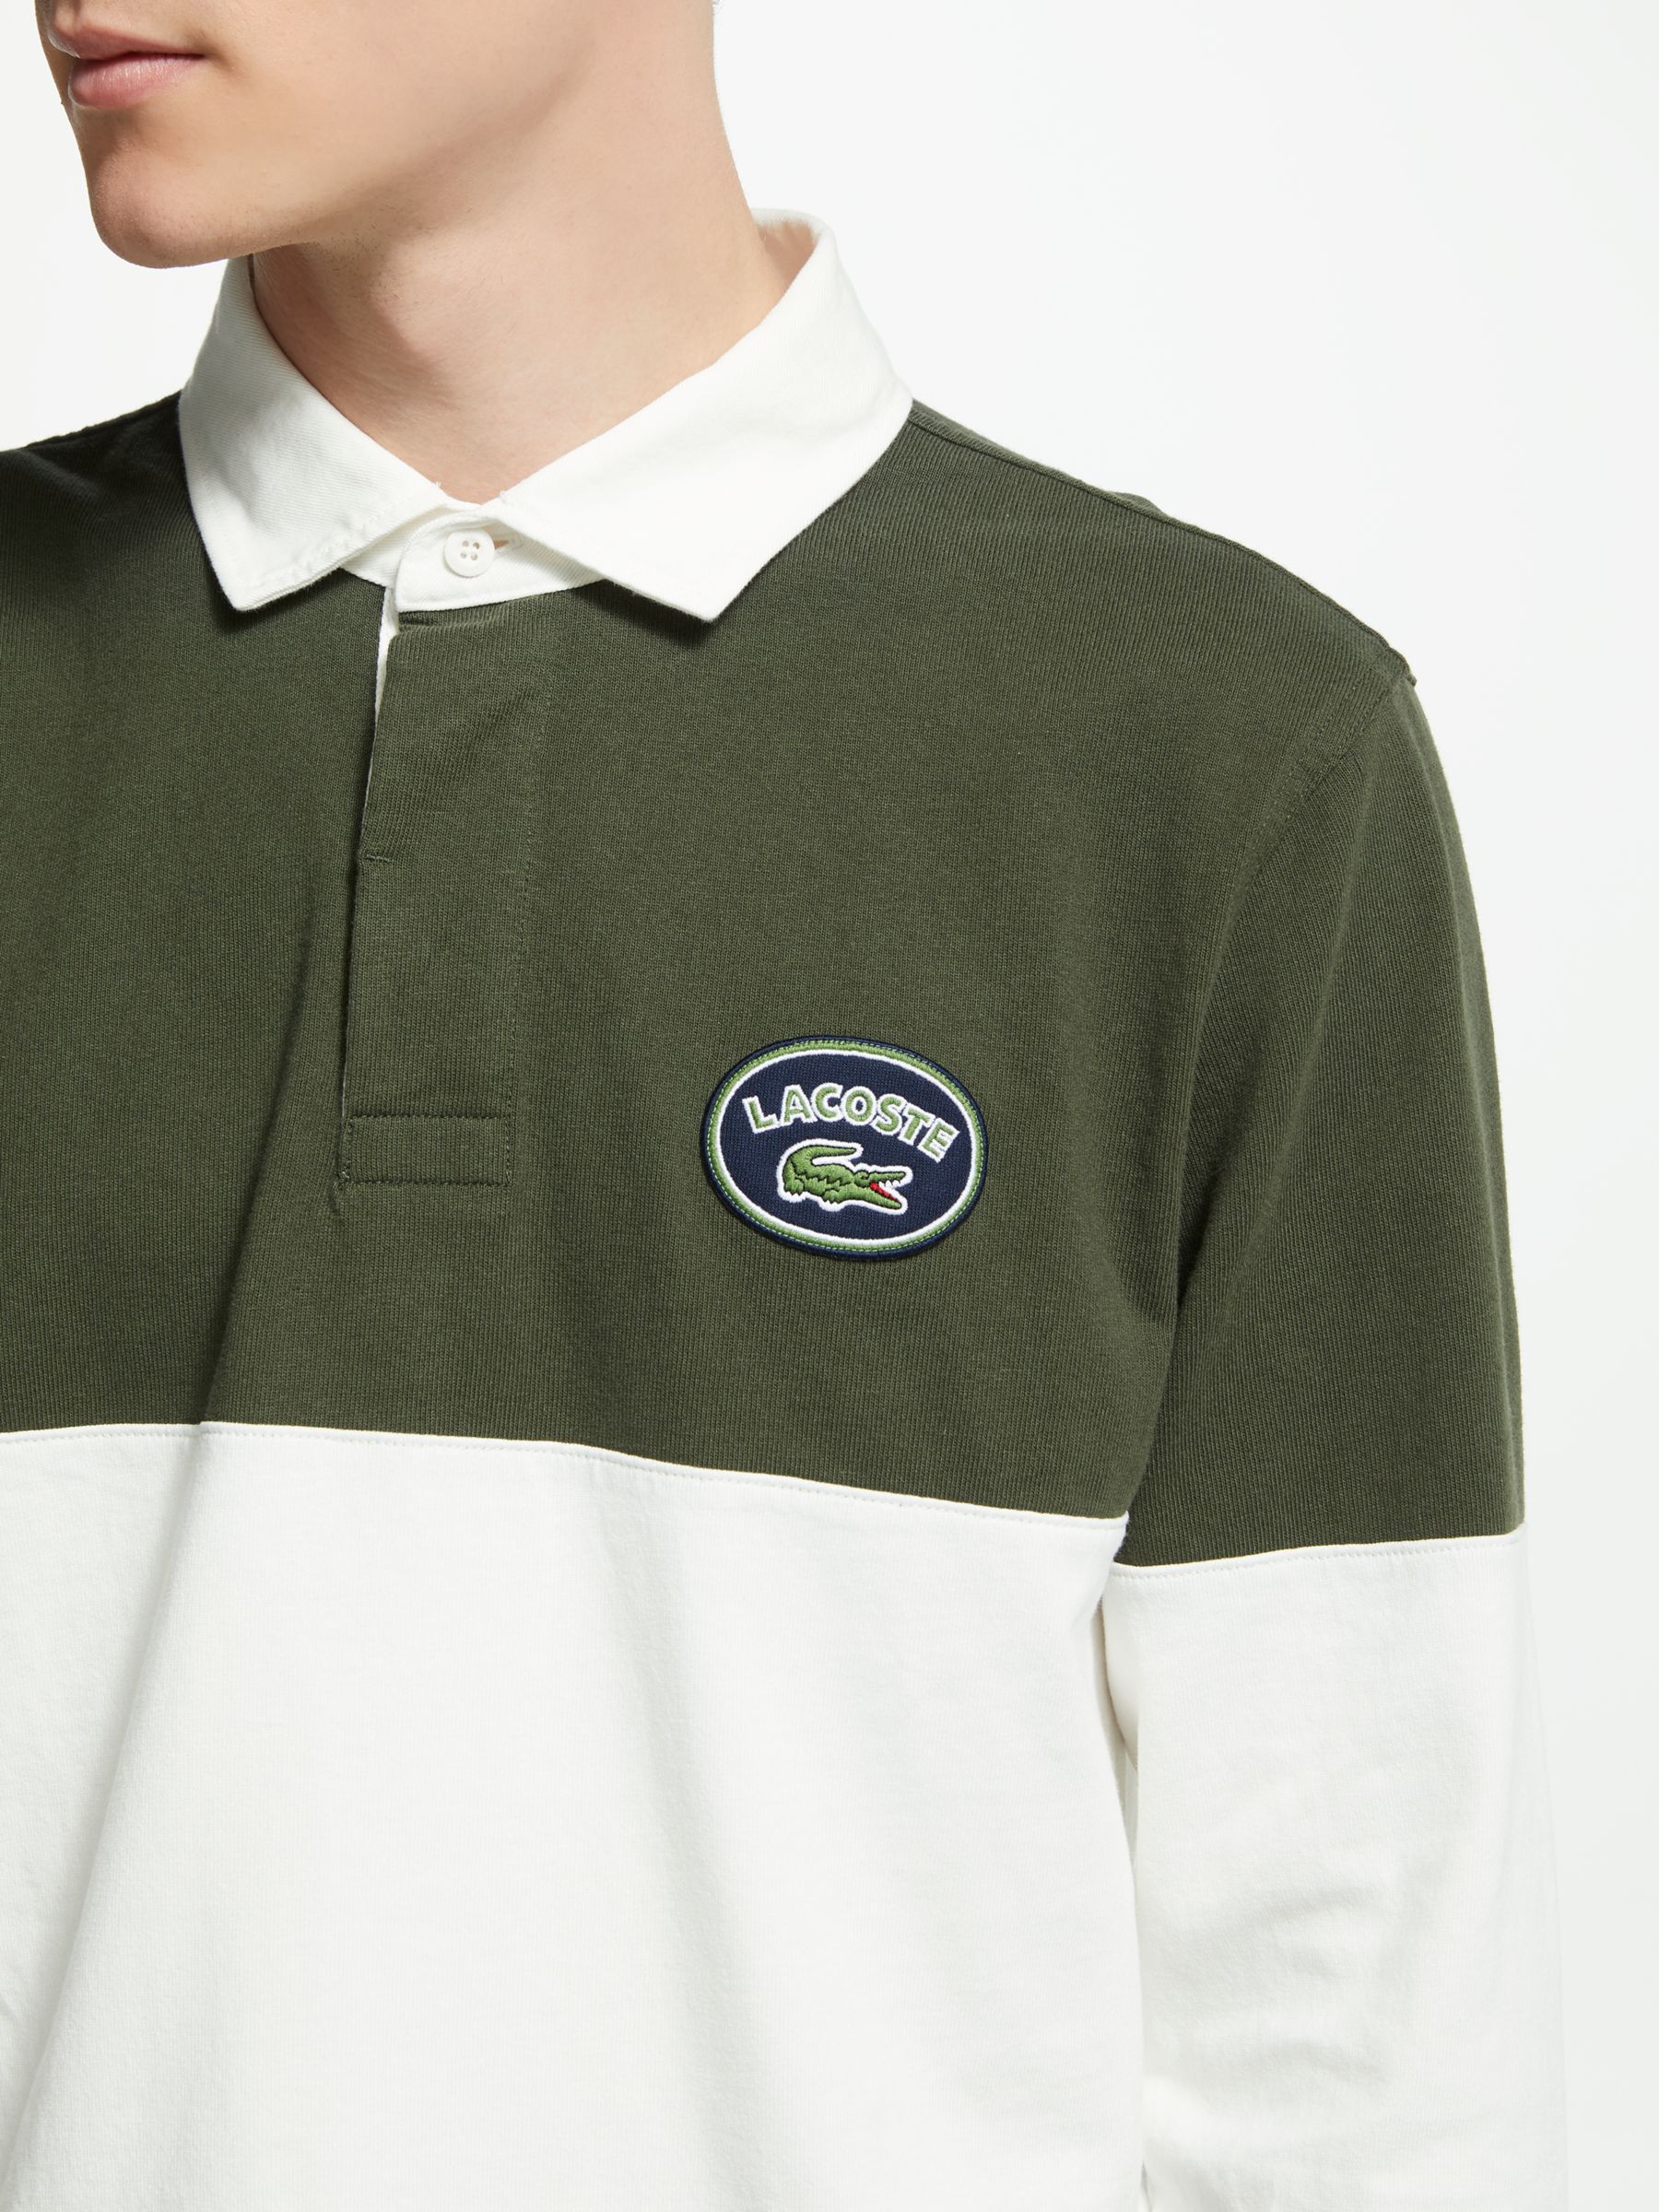 lacoste rugby top